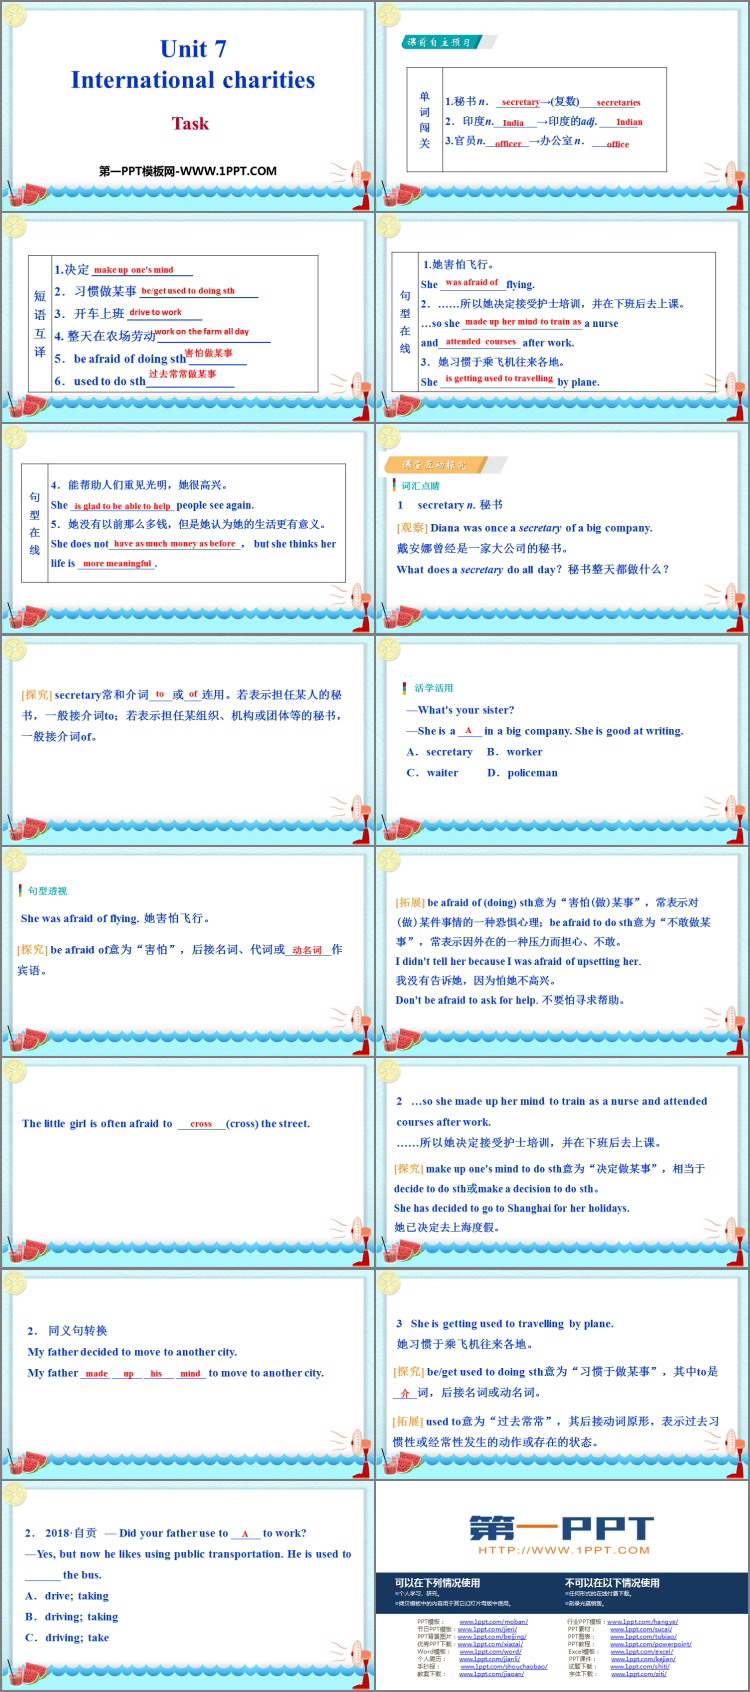 《Intemational charities》Task PPT课件